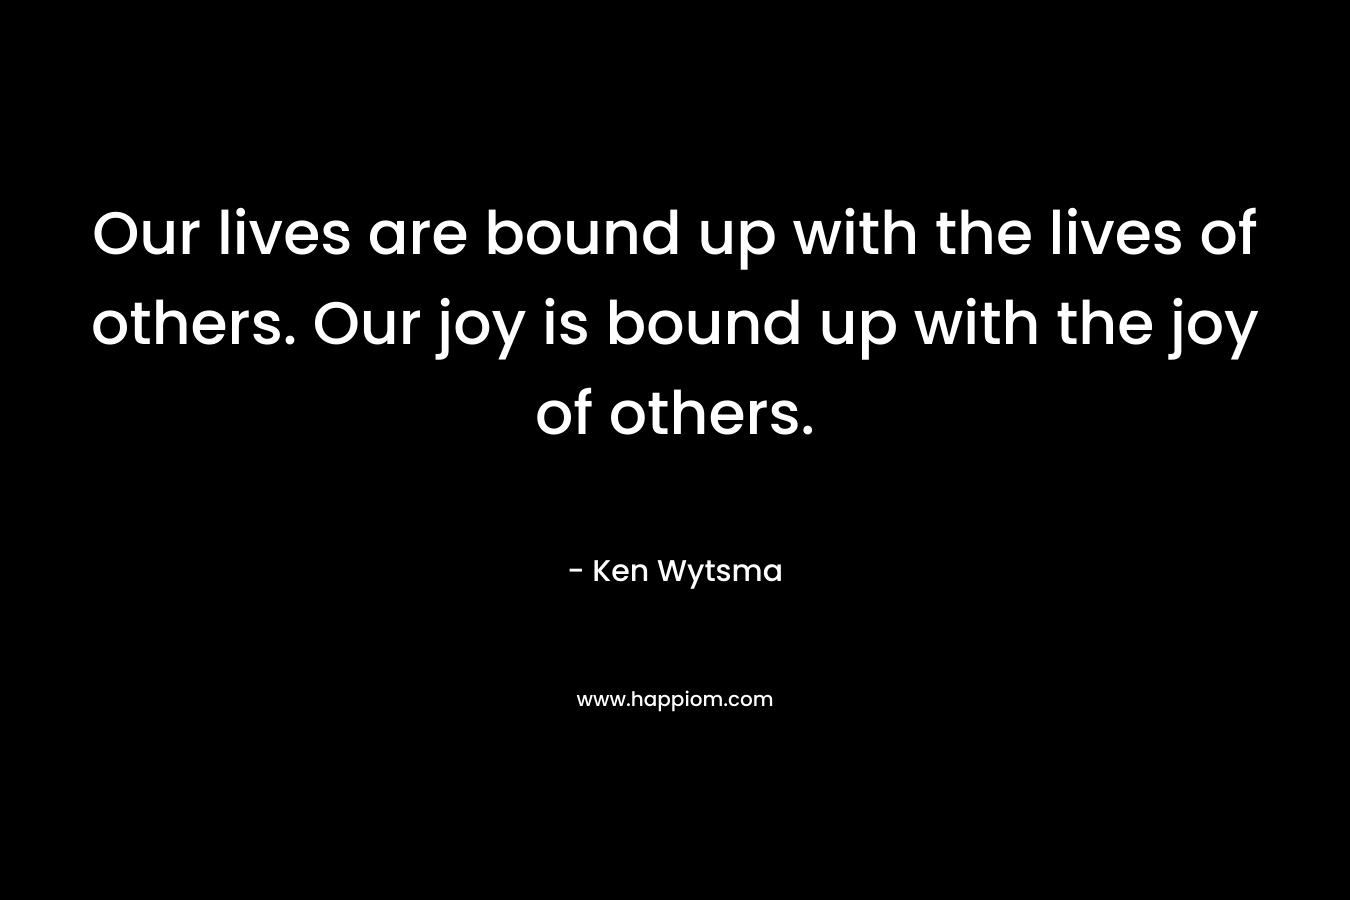 Our lives are bound up with the lives of others. Our joy is bound up with the joy of others.